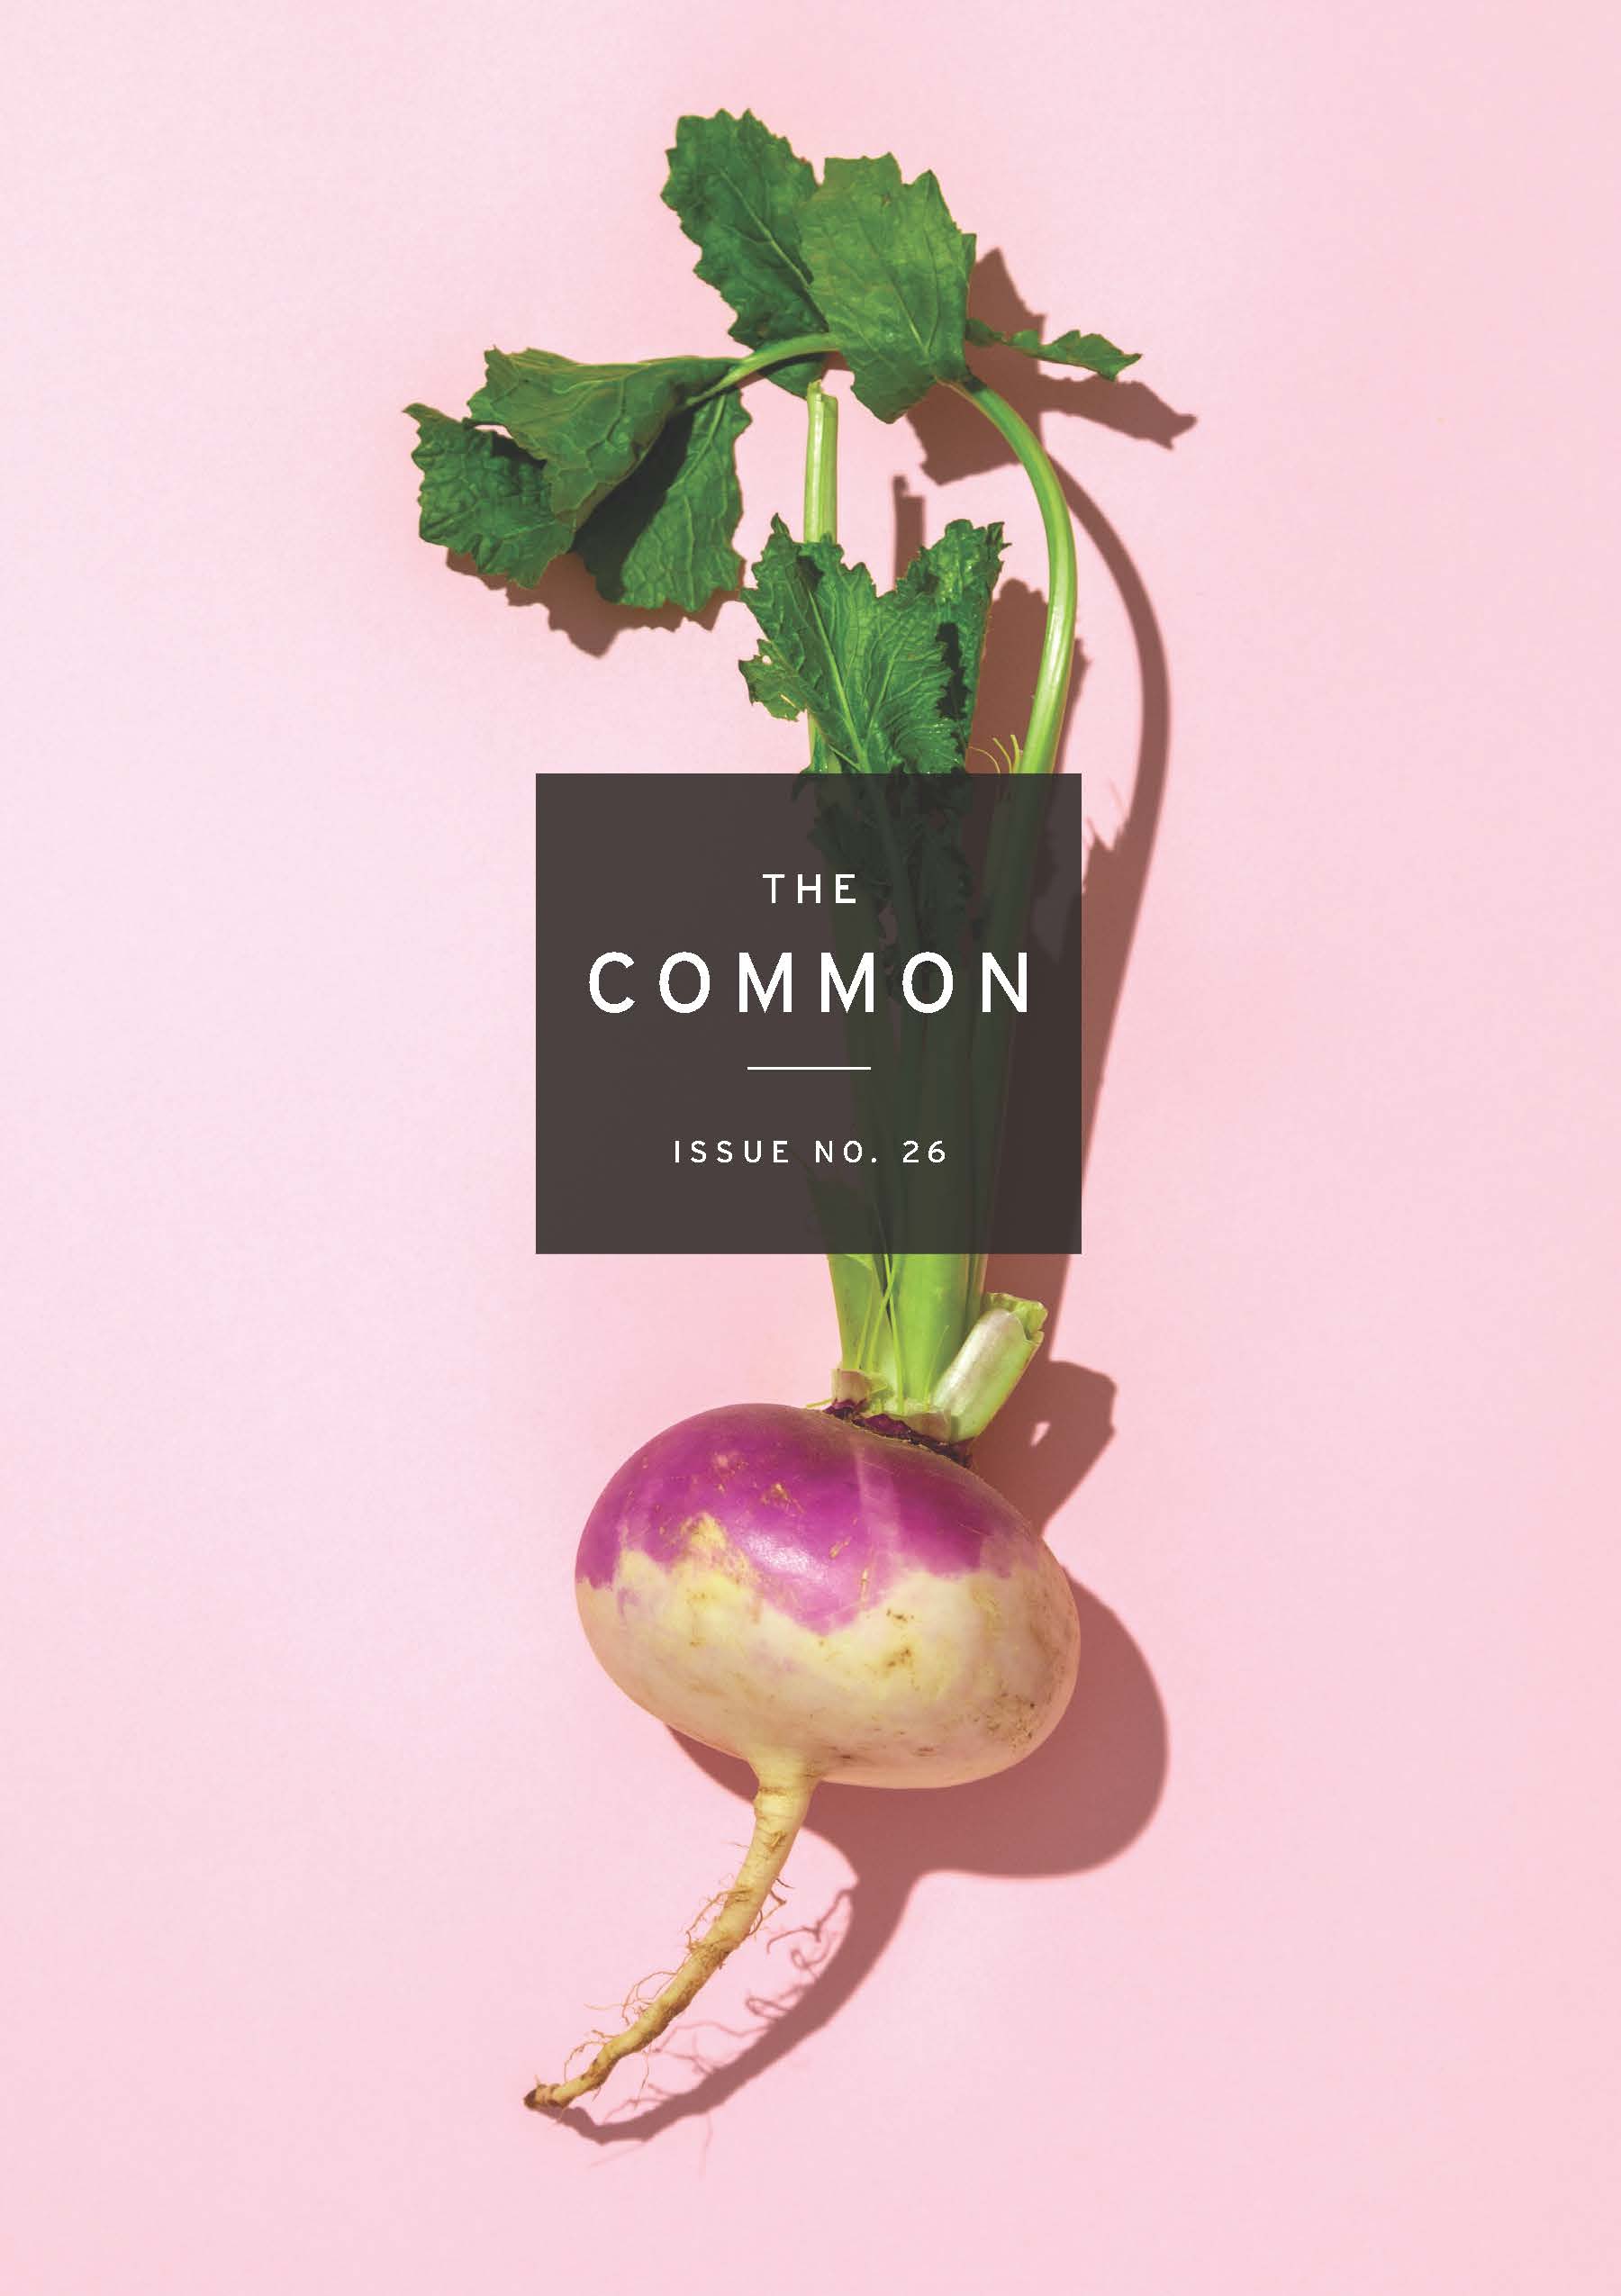 Issue 26 of The Common